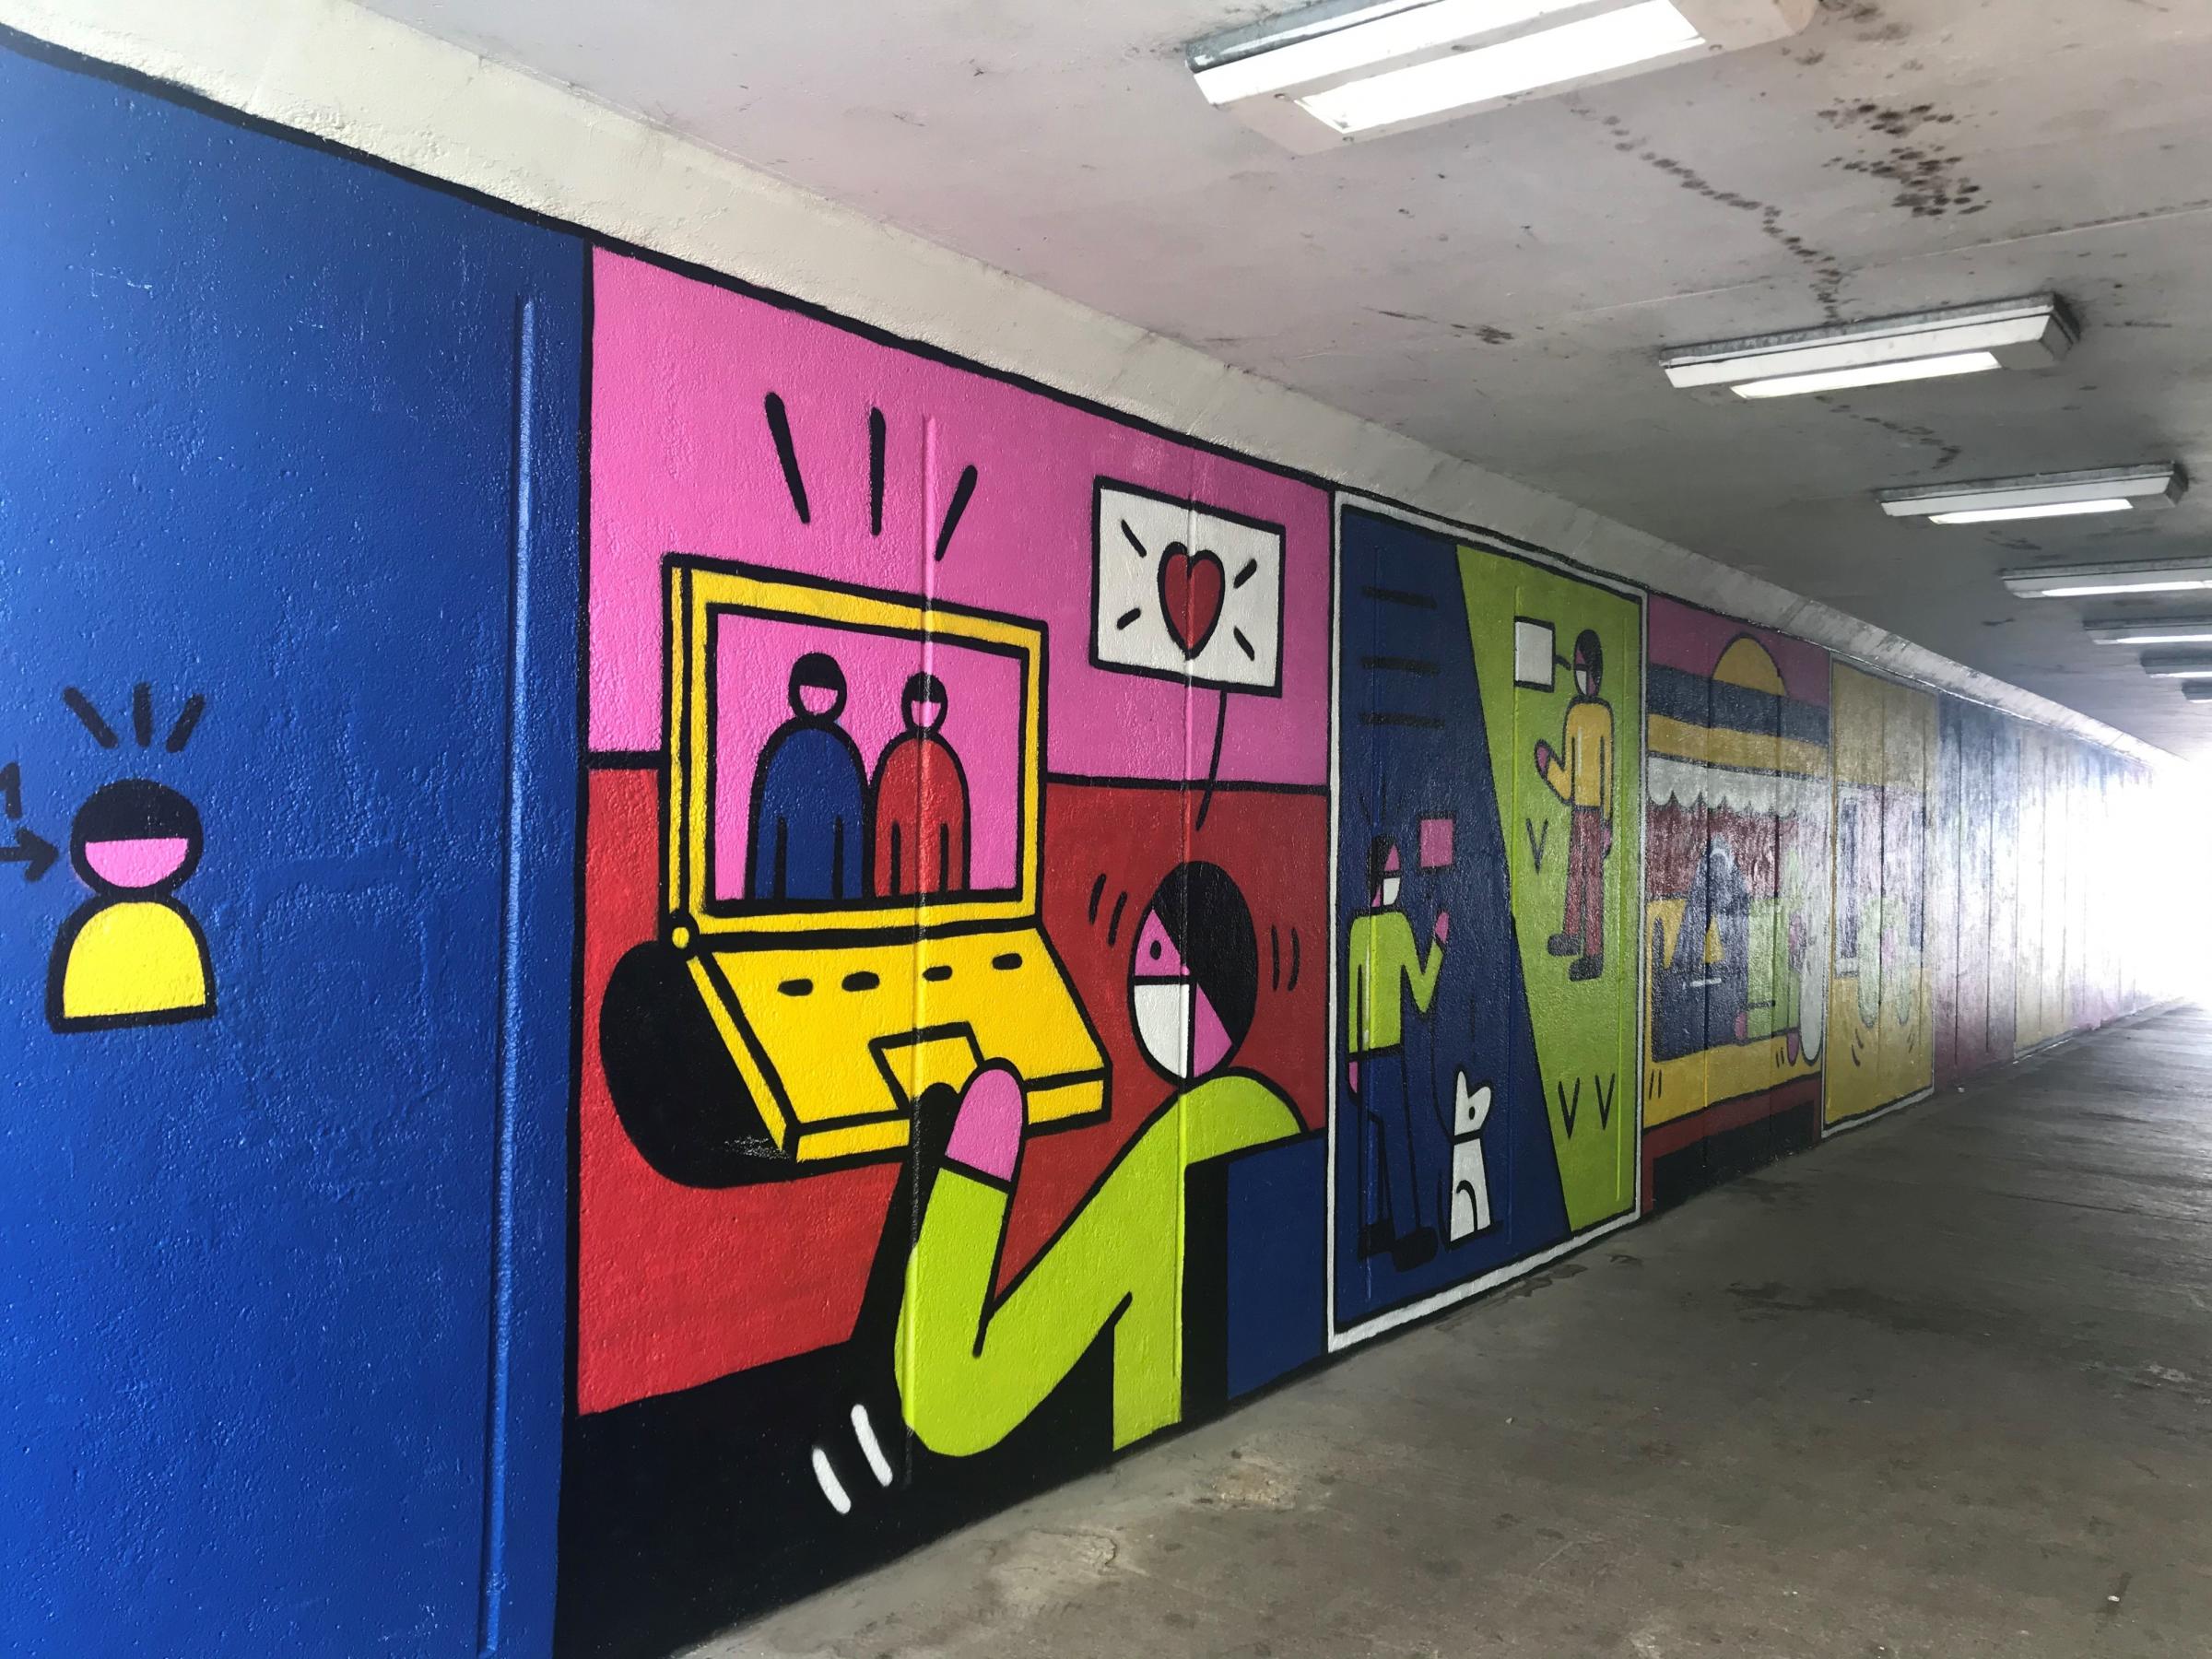 The subway was painted as part of the festival